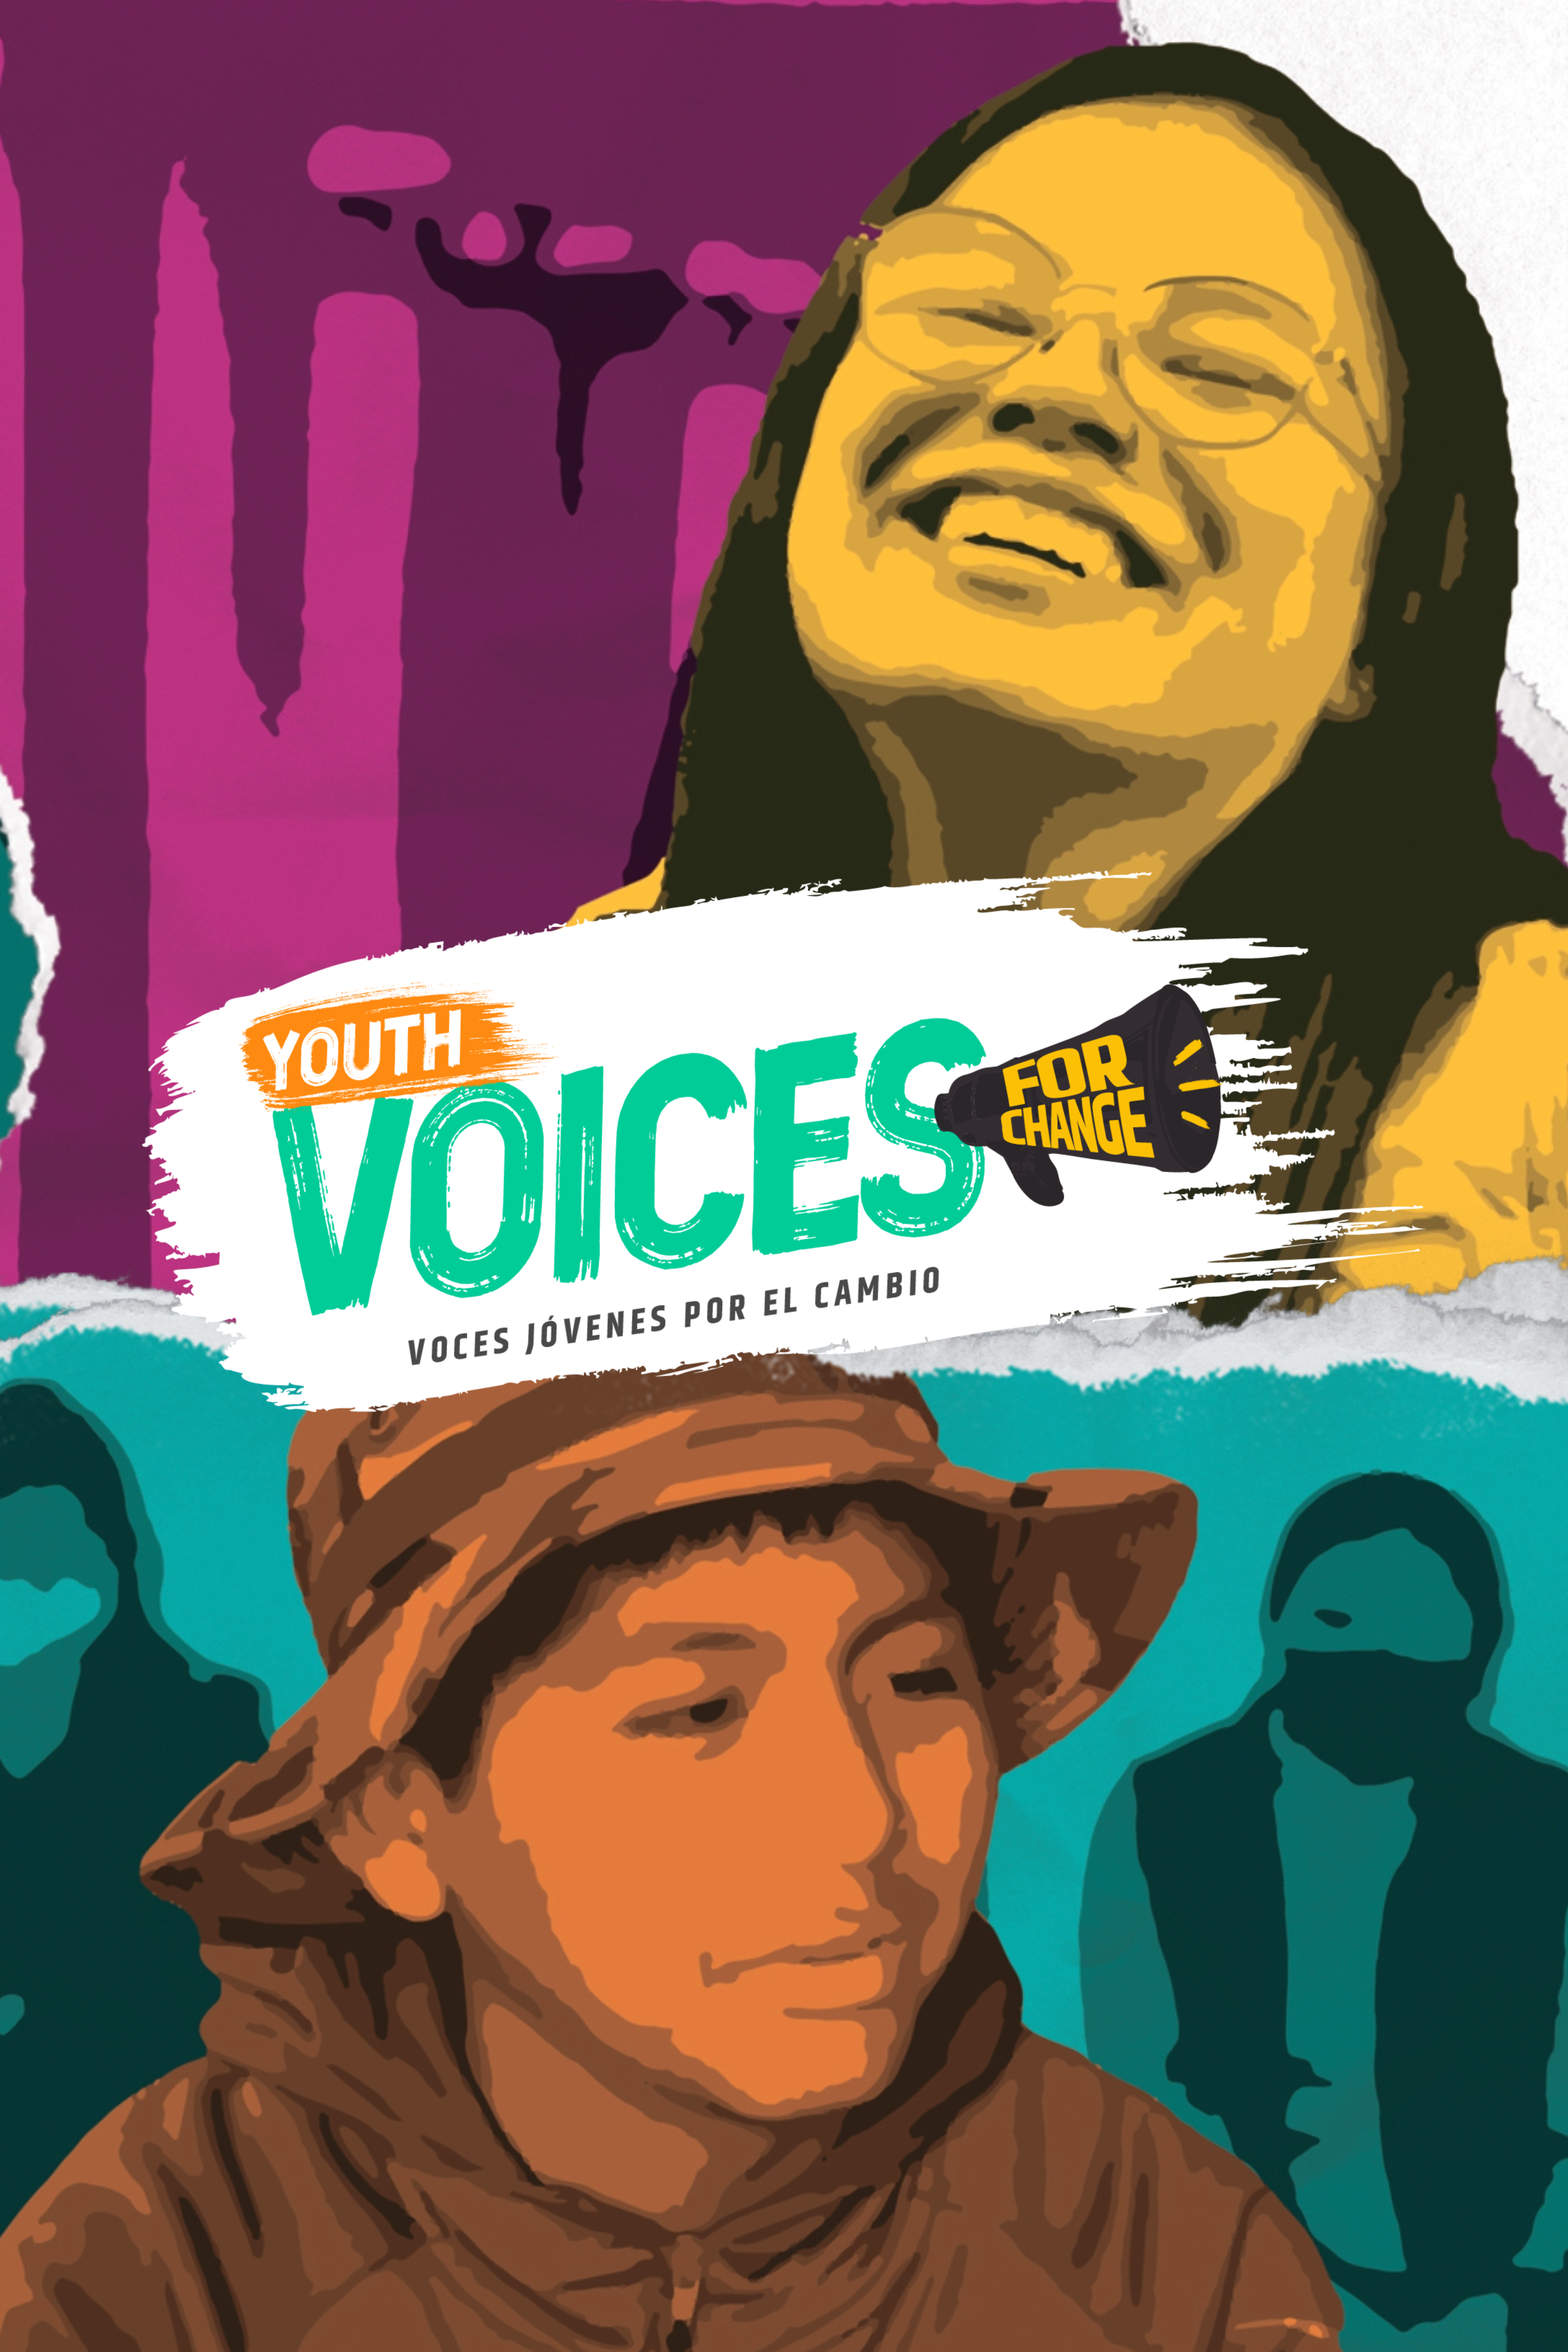 Youth Voices for Change Bolivia